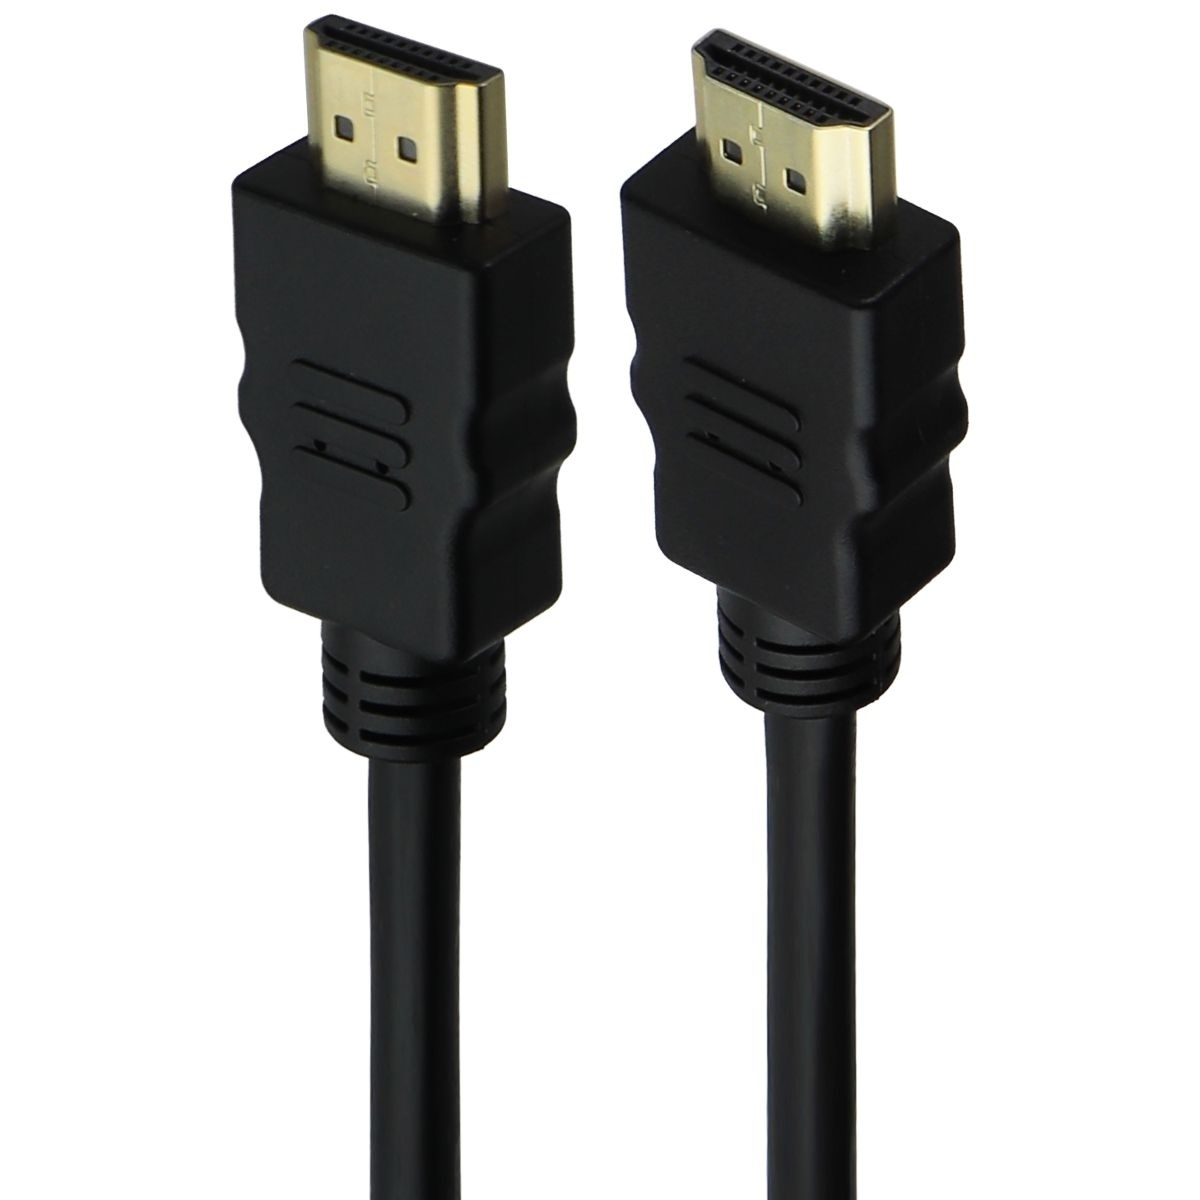 Tripp Lite High Speed HDMI Cable, Ultra HD 4K x 2K - Black 6-FT (P568-006) - image 1 of 3